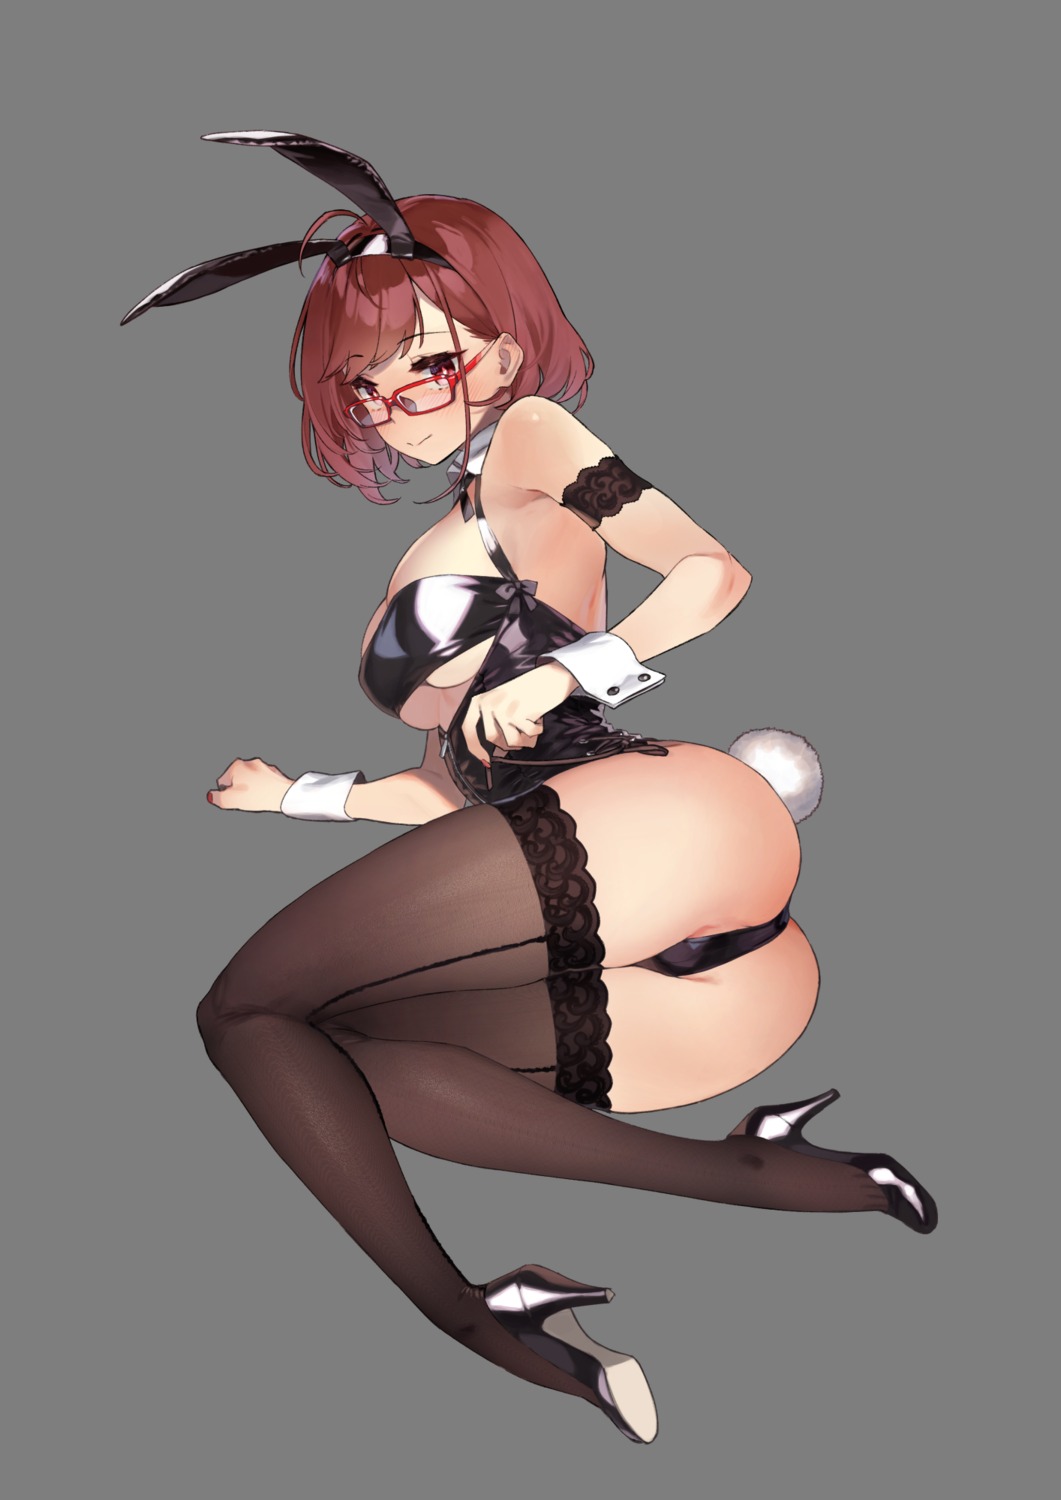 92m animal_ears ass bunny_ears heels megane tail thighhighs transparent_png